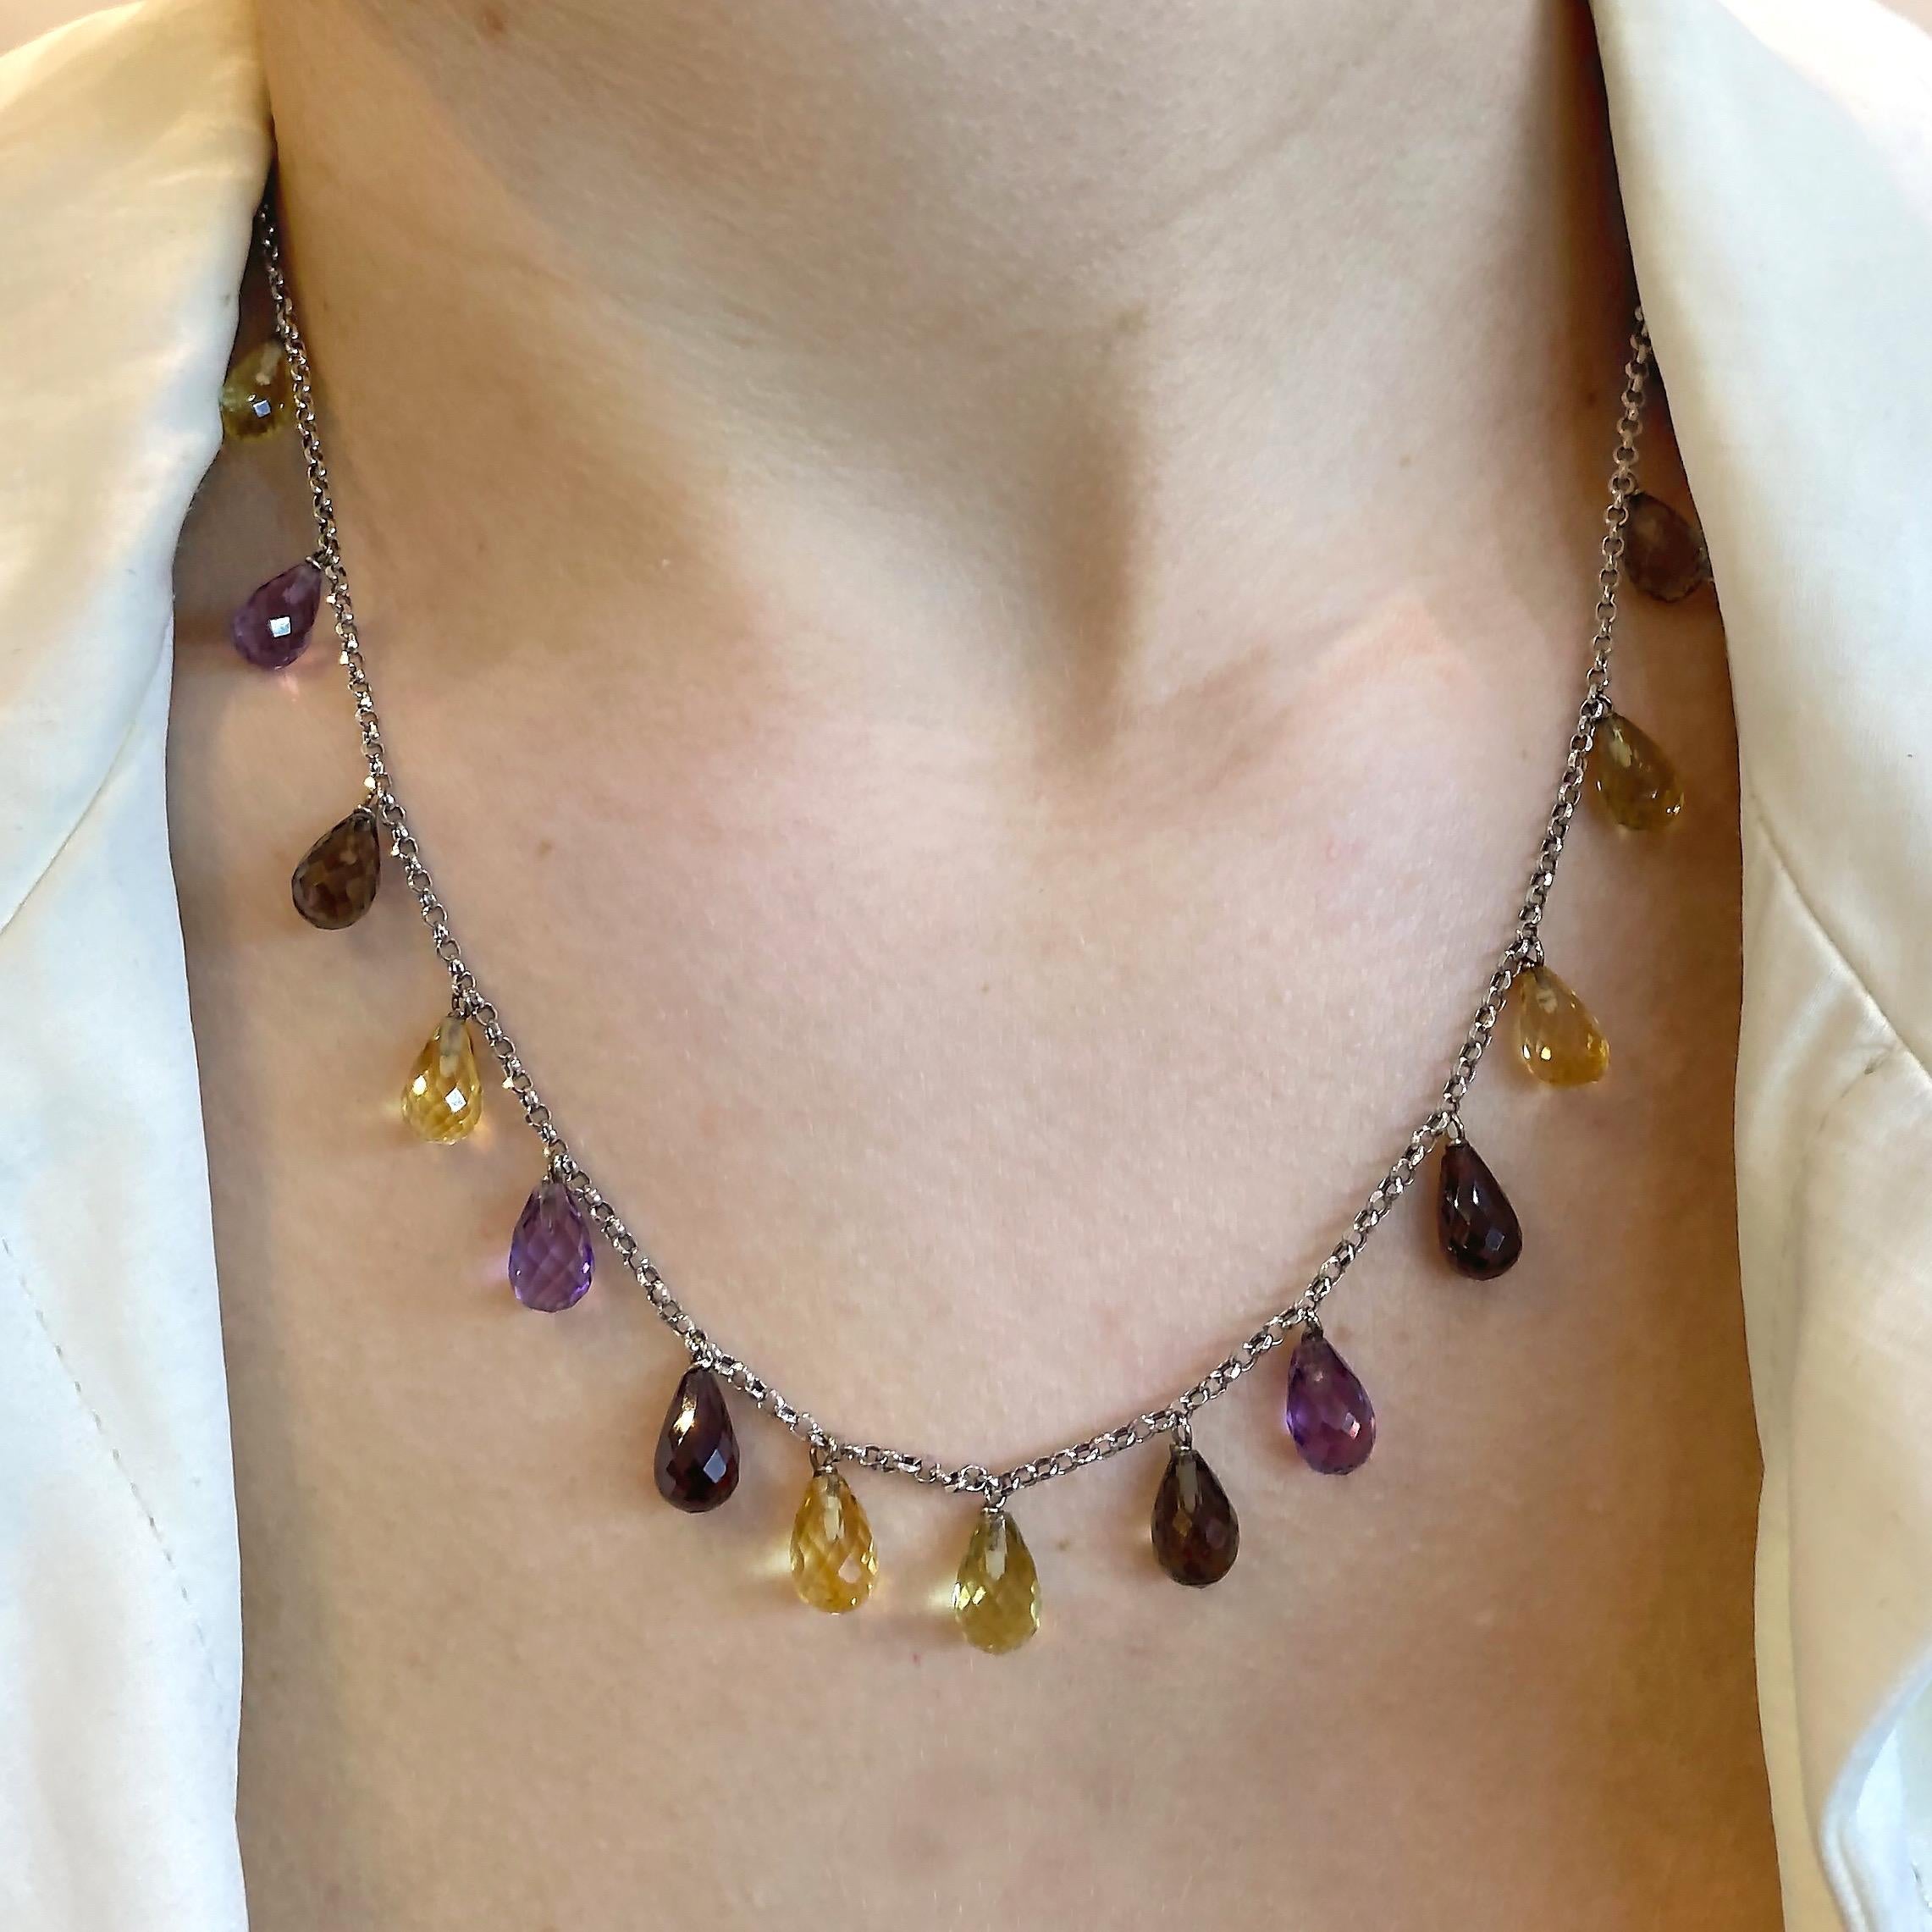 Designed to be your daily necklace that will bring light into any of your day to night looks. The combination of these colorful briolette cut gemstones on a dainty 18K gold chain, makes it the perfect effortless daily necklace to wear with